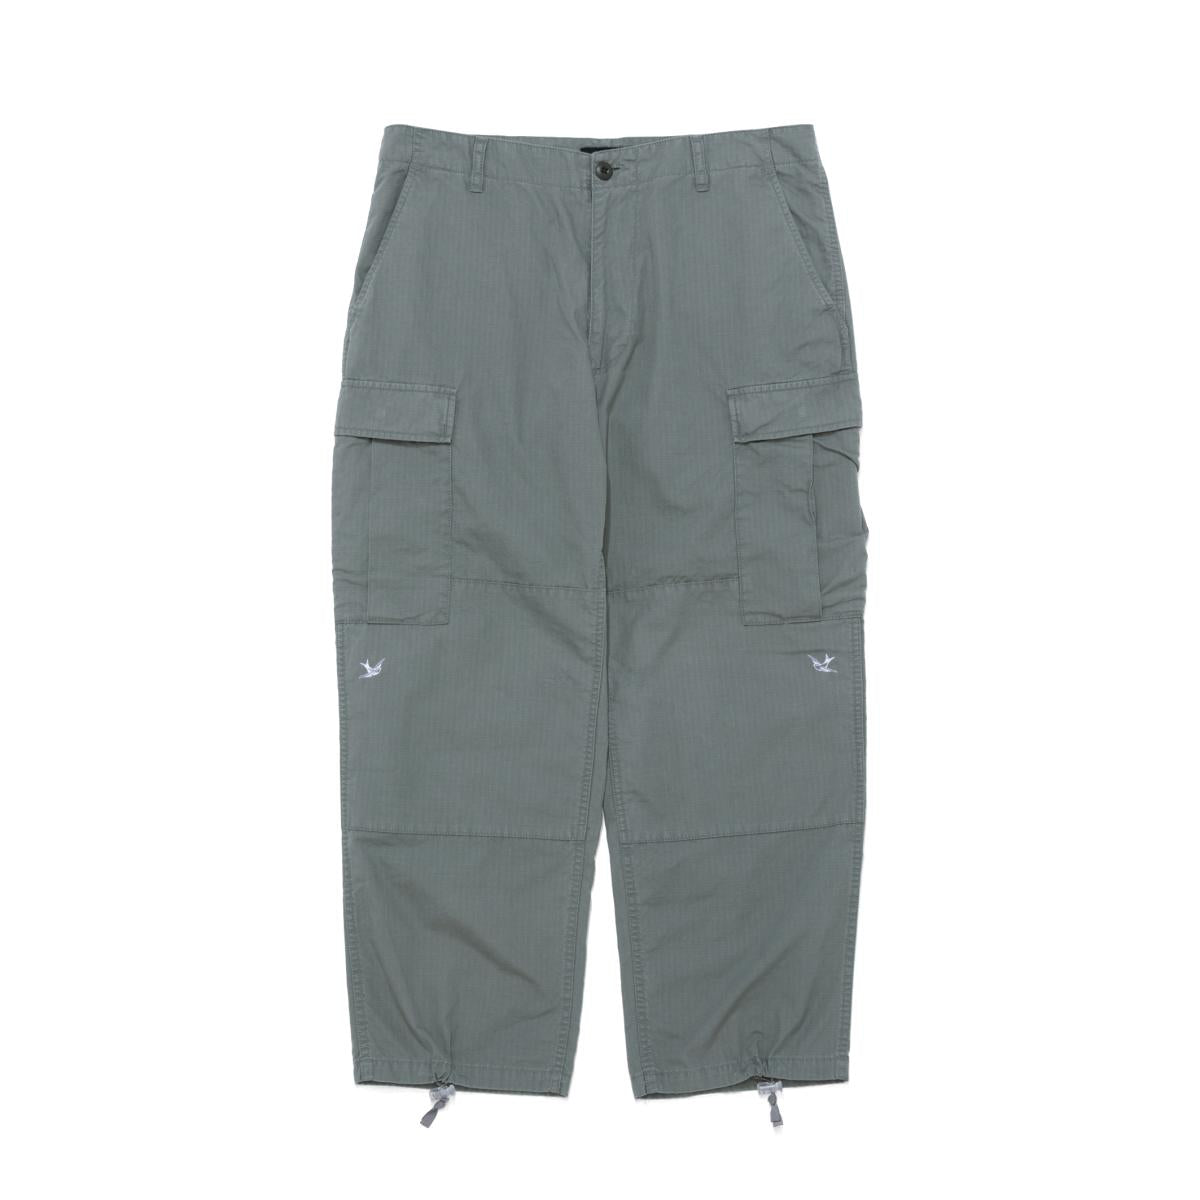 GOD SELECTION XXX CARGO PANTS A23-PT-07 - ワークパンツ